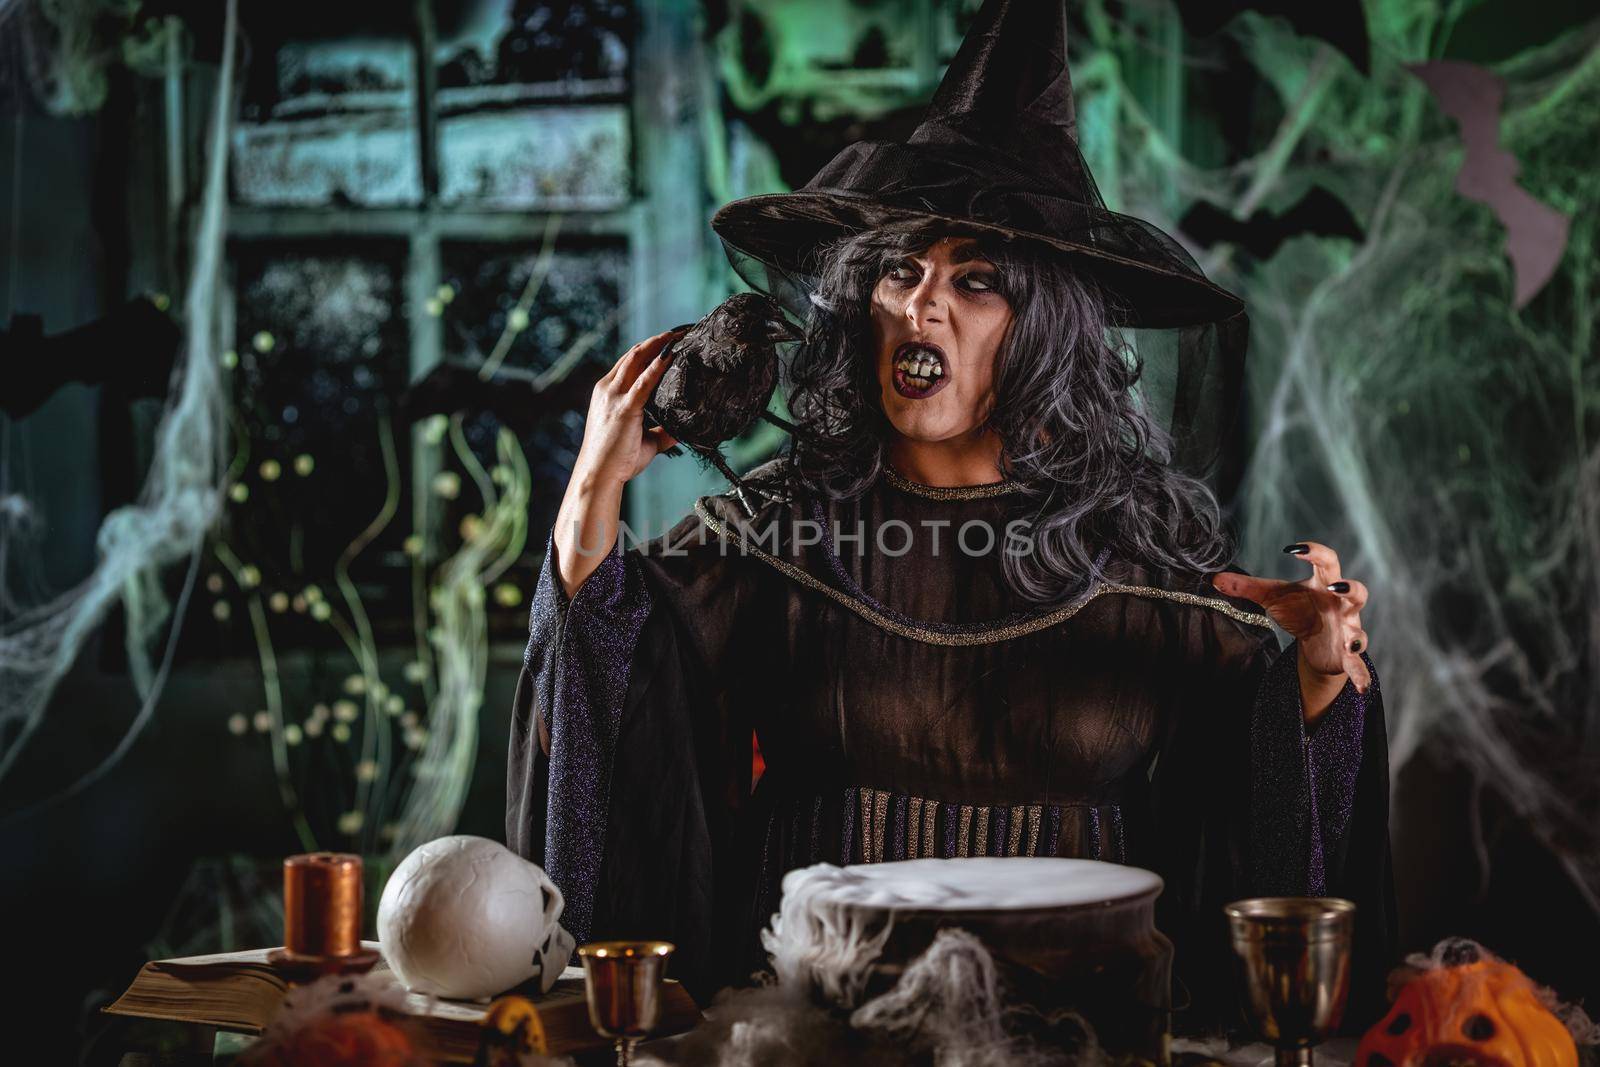 Witch with awfully face in creepy surroundings full of cobweb with blackbird on her shoulder sends evil thoughts.